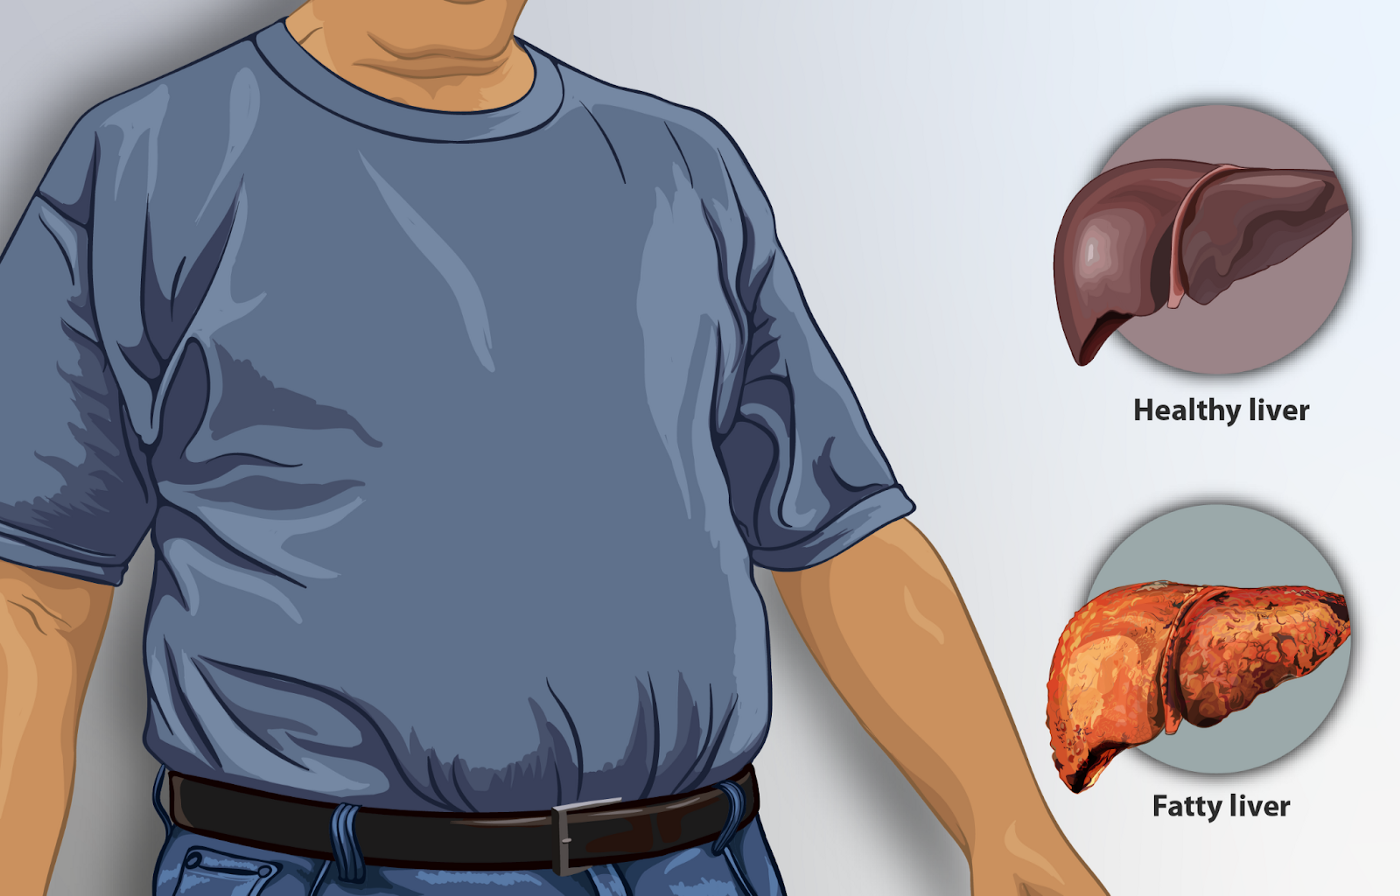 A vector image of a healthy liver and a fatty liver.